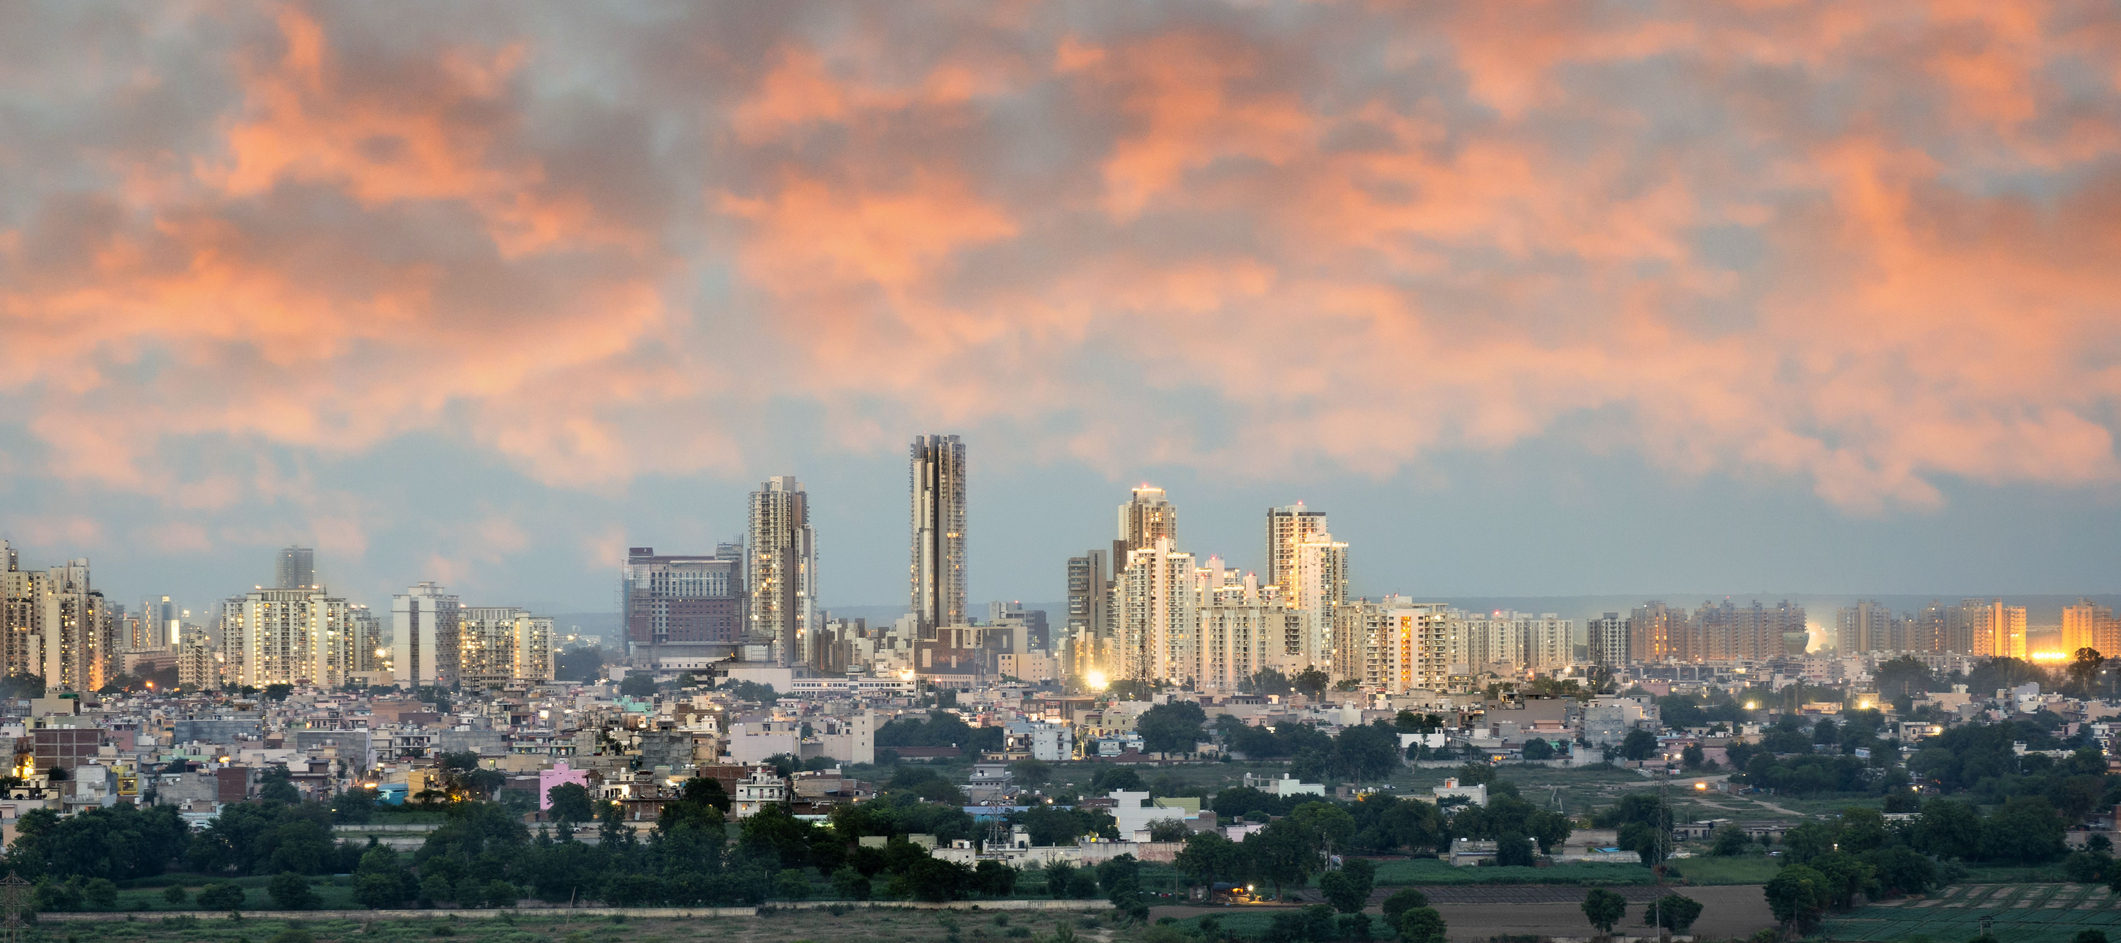 Experience extraordinary Indian sights like this sunset over Bangalore when you take a tailor-made holiday with Alfred&.